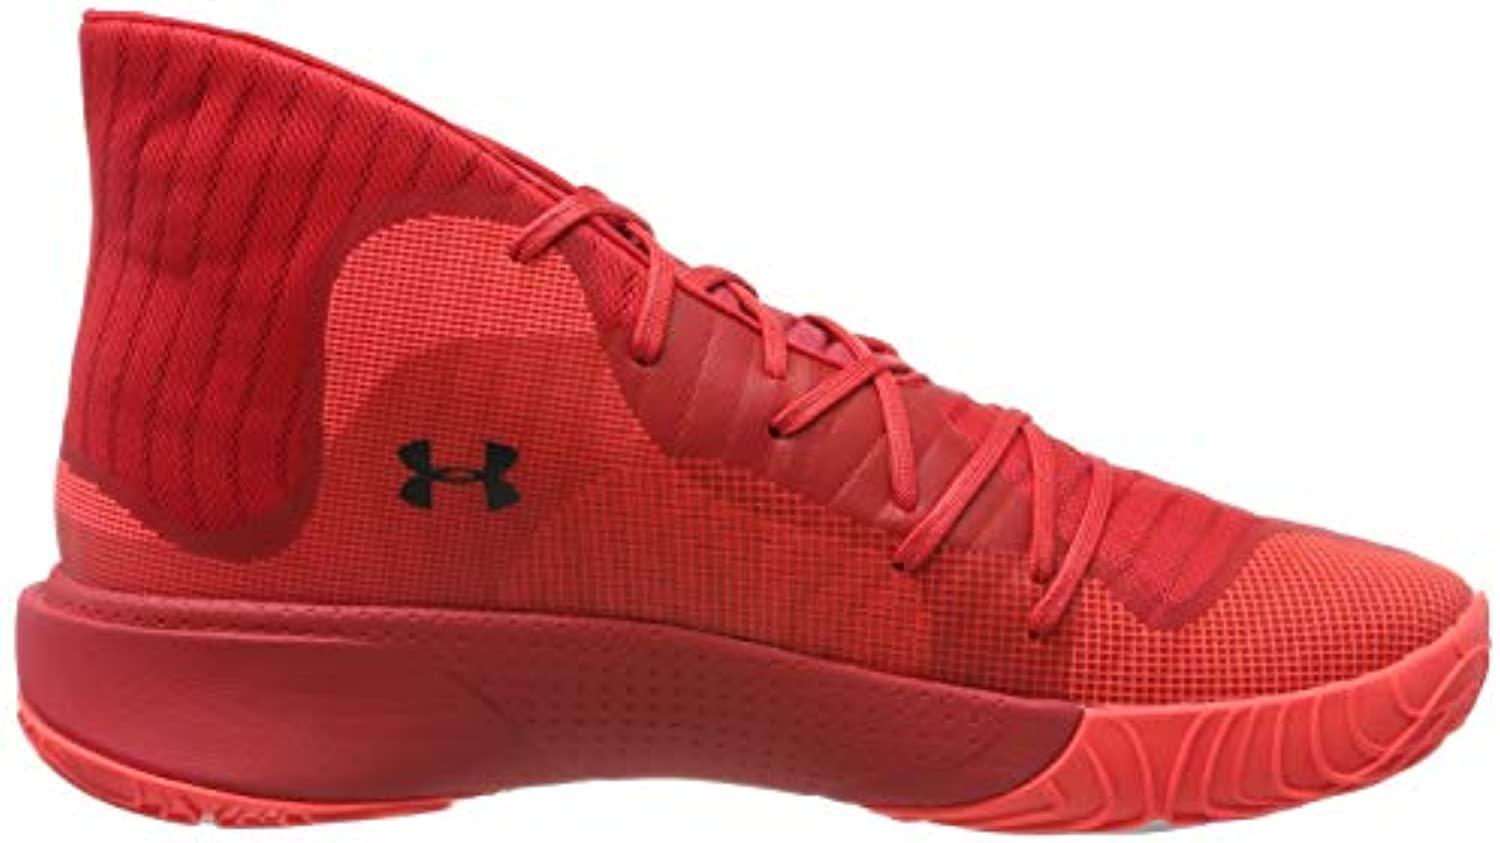 Under Armour Rubber Spawn Mid Basketball Shoes in Red for Men - Save 38% -  Lyst